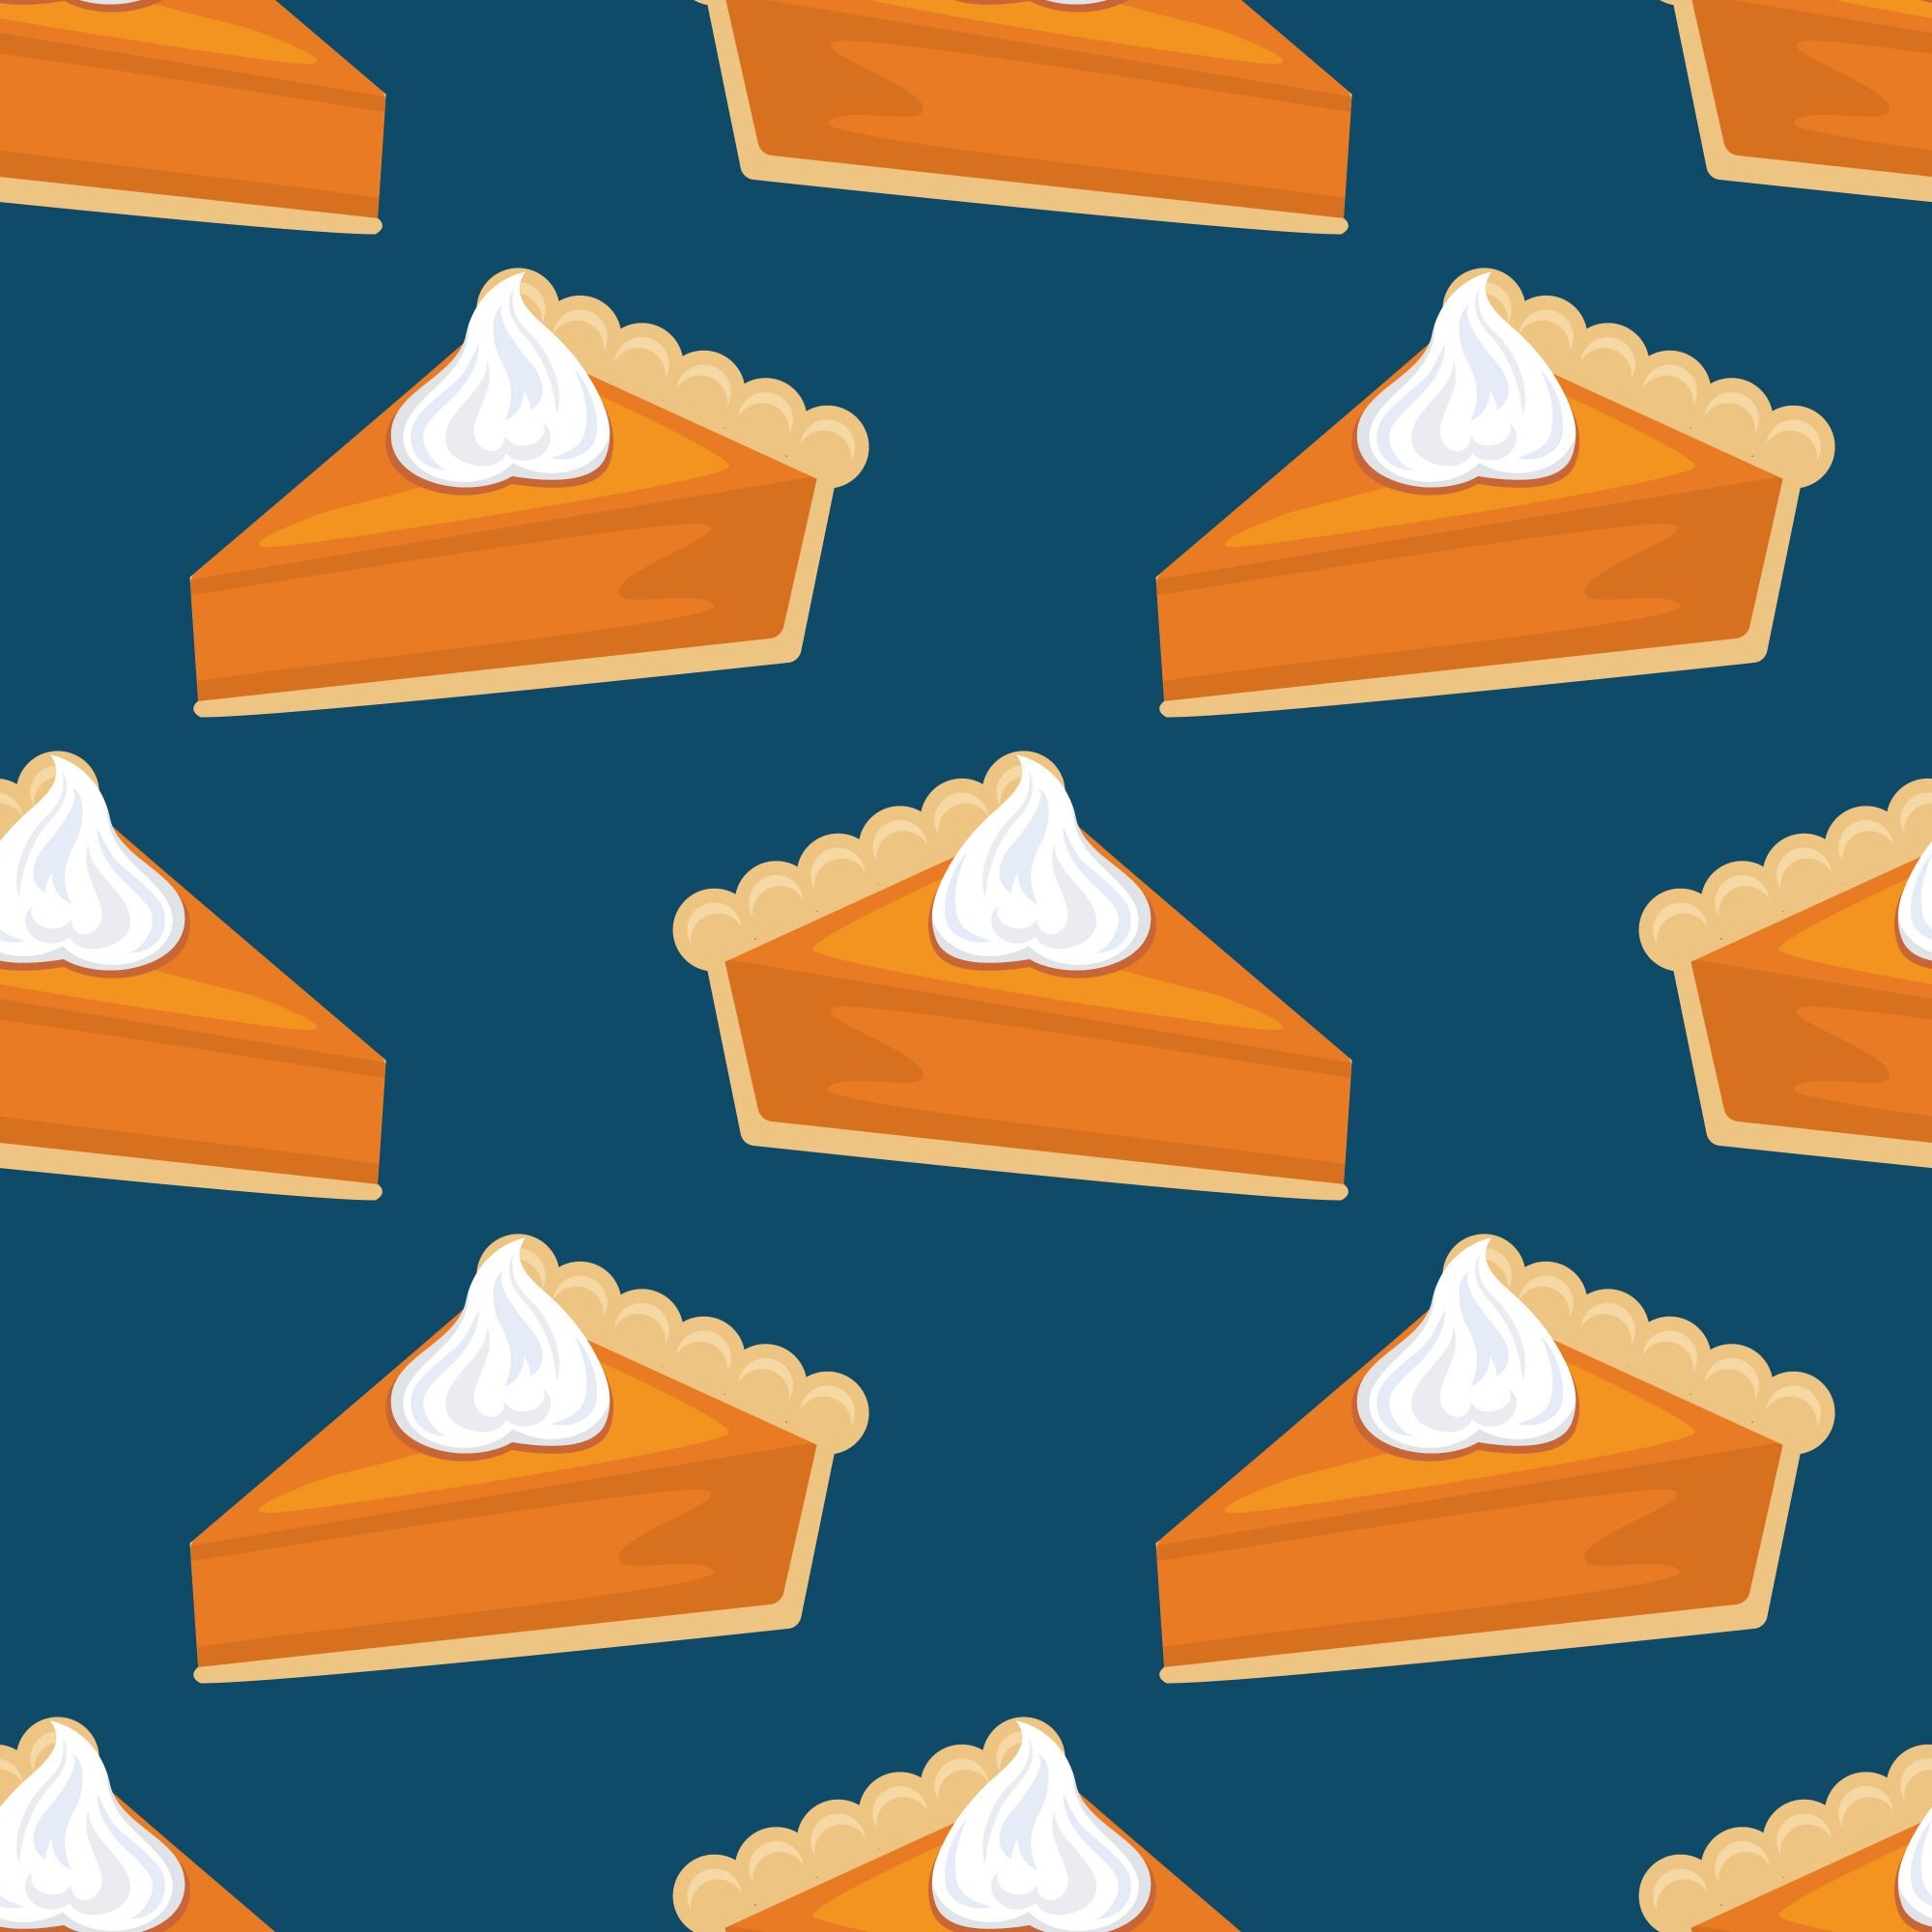 Pumpkin Pie Is Bad, But We Eat It Because It's Tradition